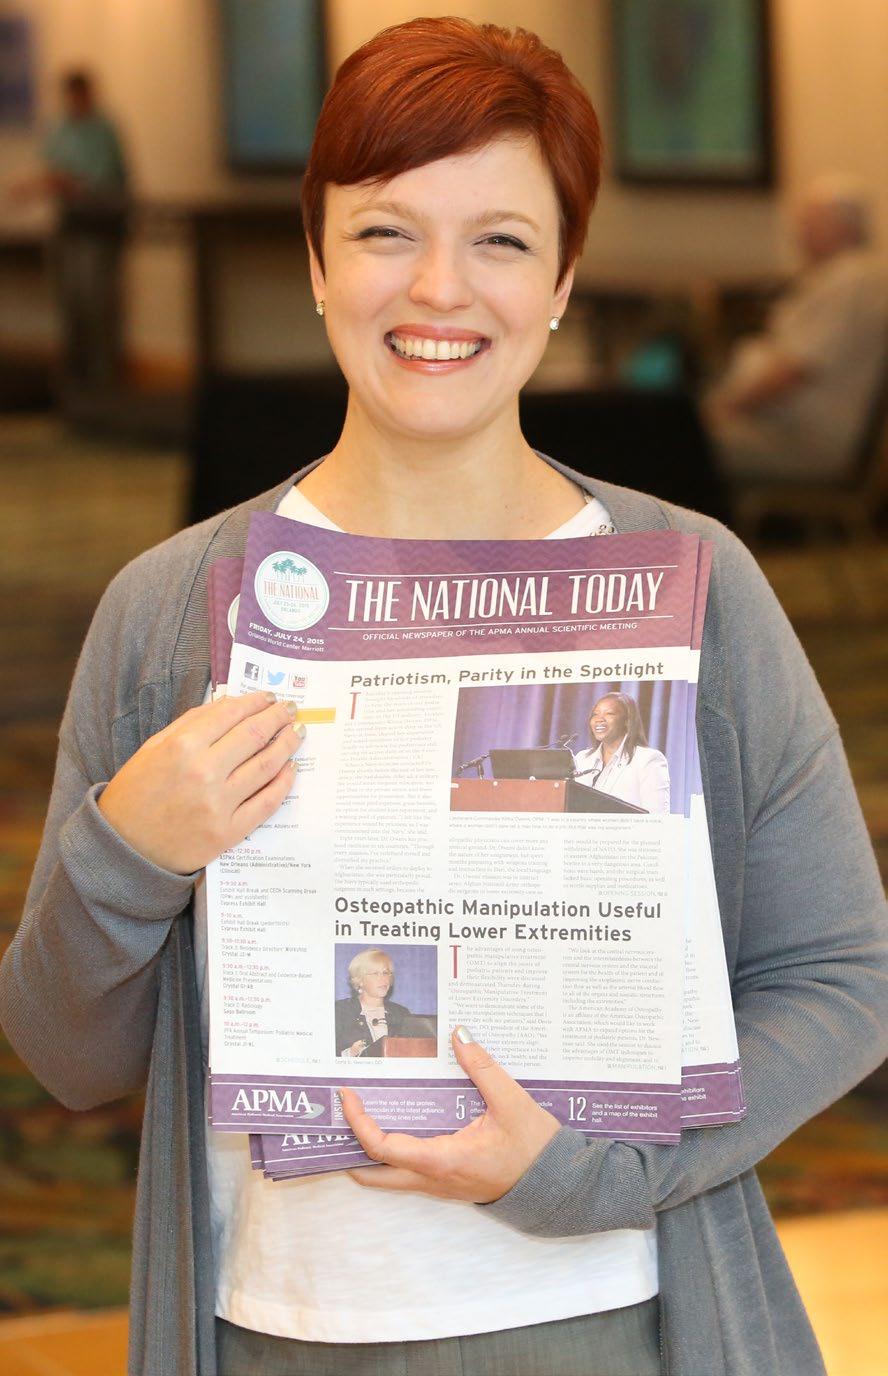 THE NATIONAL TODAY GAIN ADDITIONAL EXPOSURE DURING THE EVENT GET YOUR BRAND IN THE HANDS OF 2,000 SHOW attendees during the event (three newspapers published).